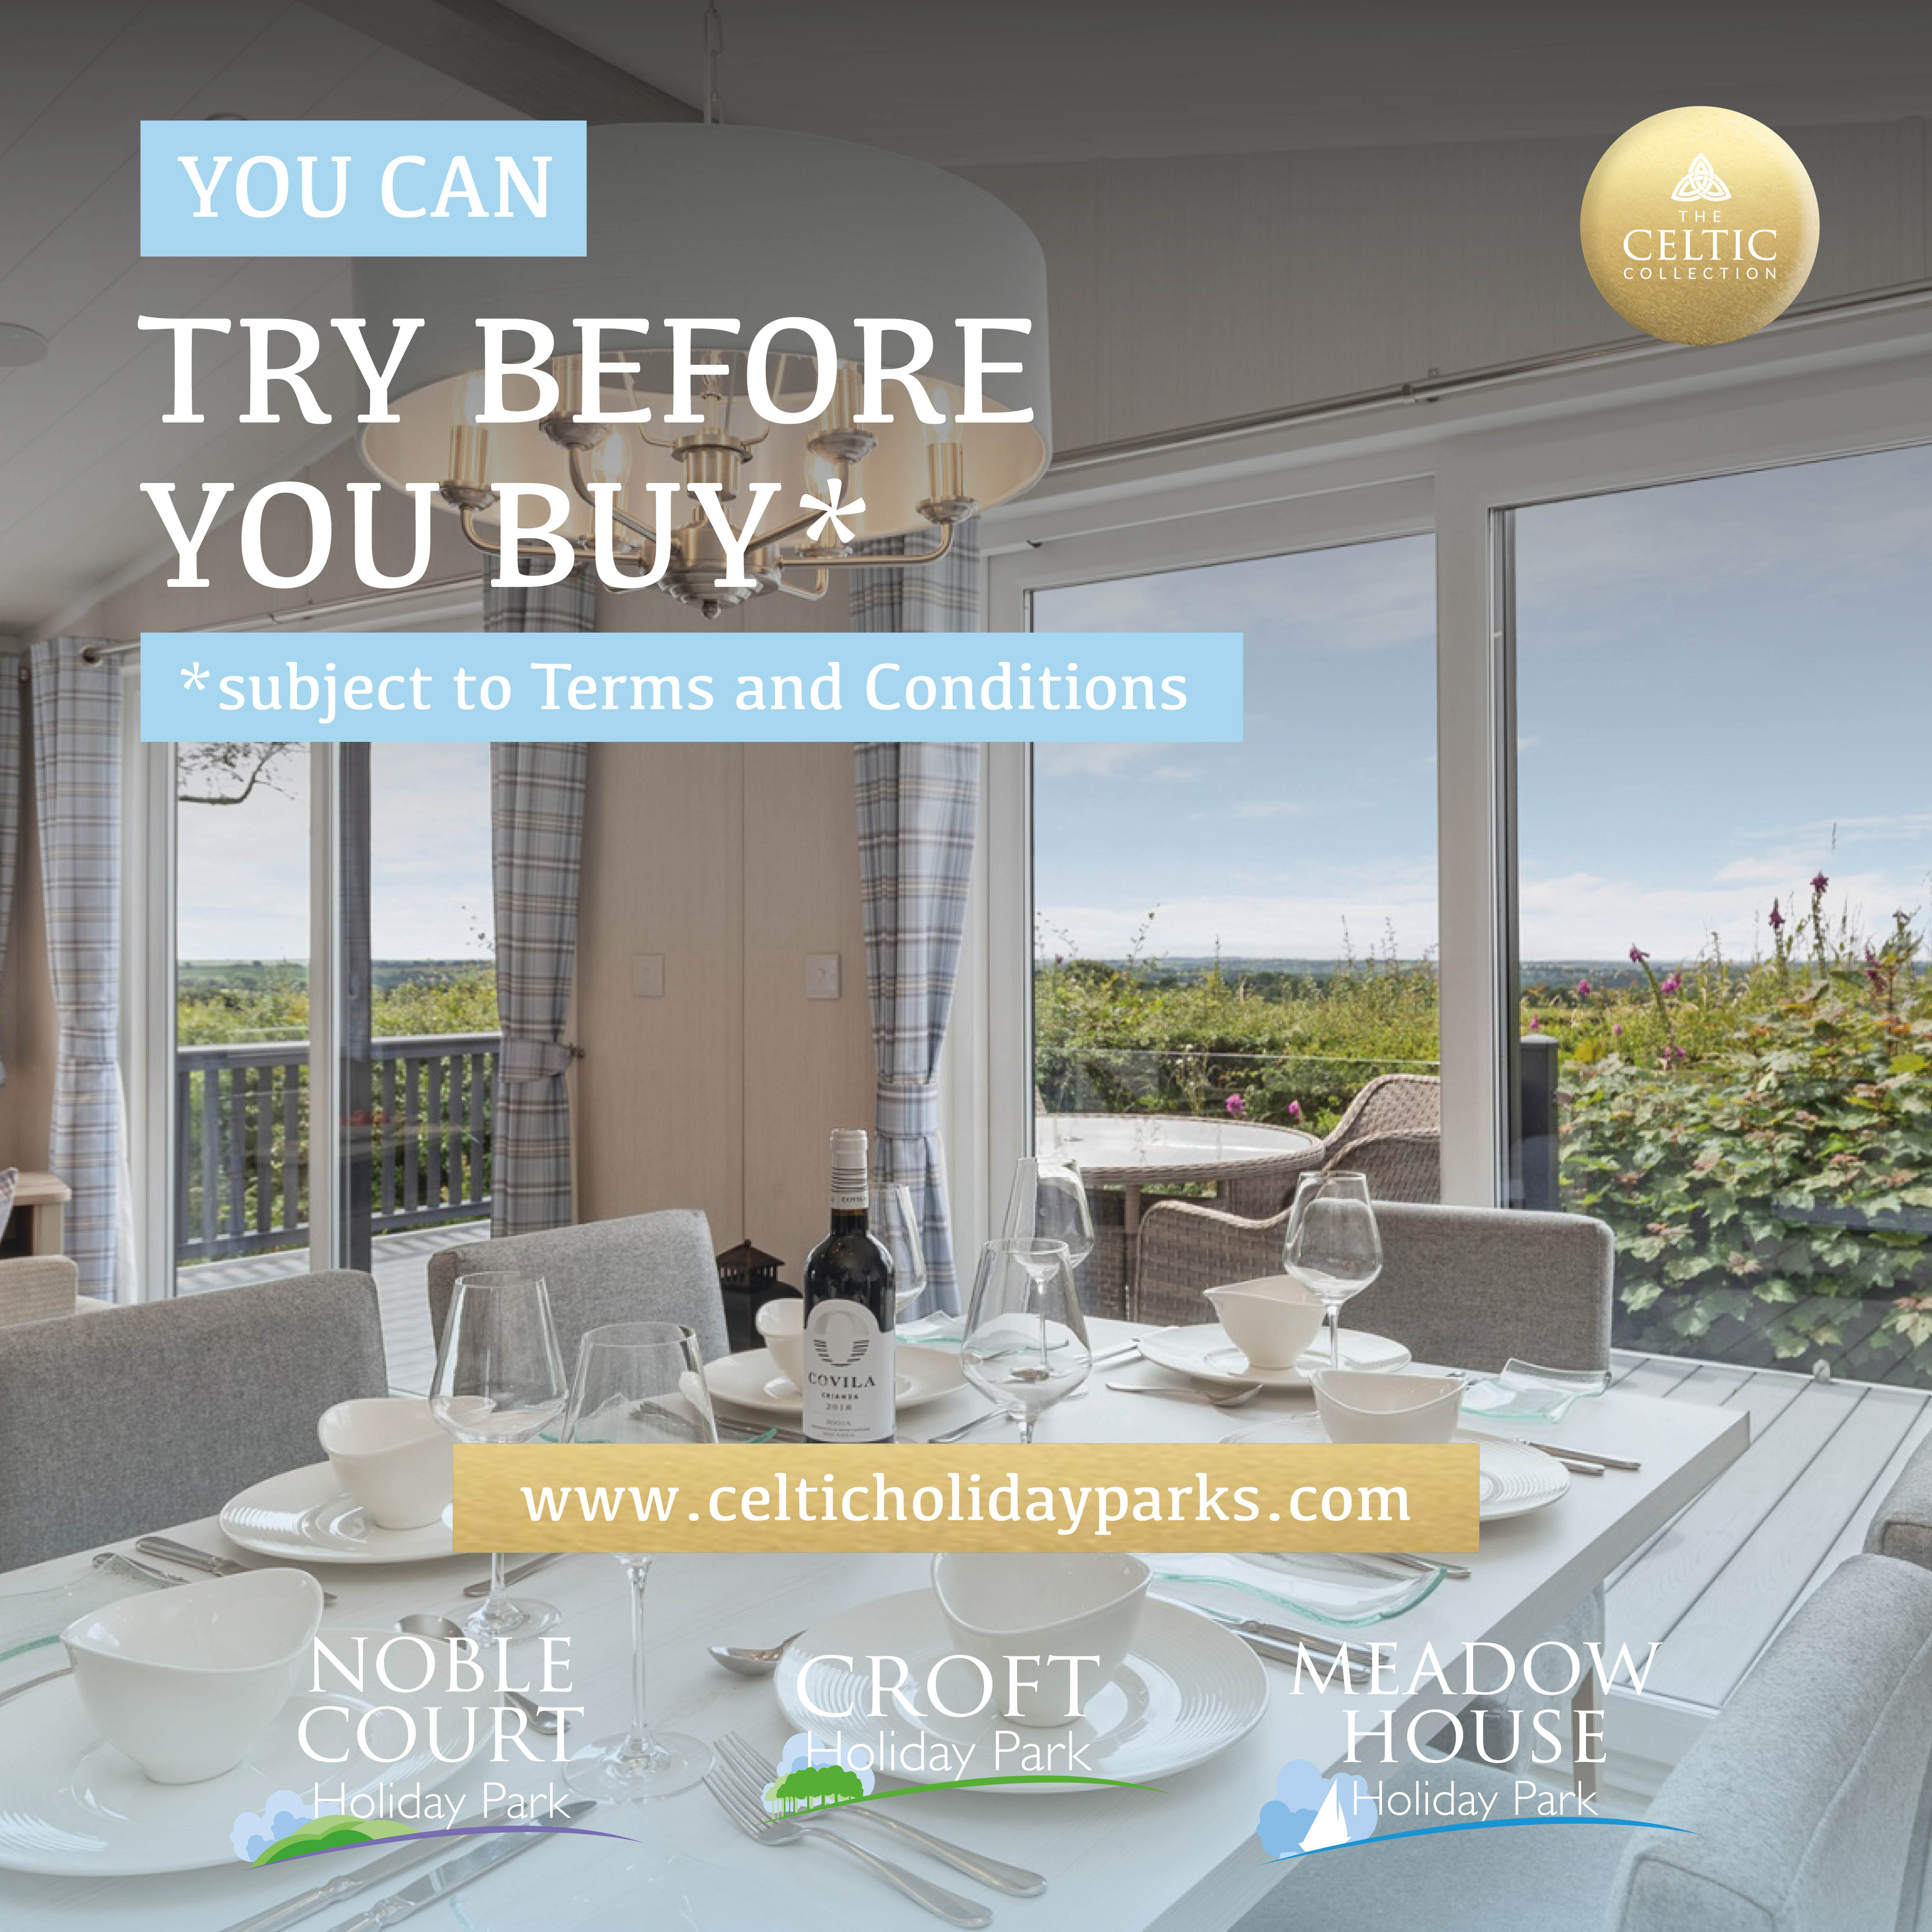 Try Before You Buy at Celtic Holiday Parks